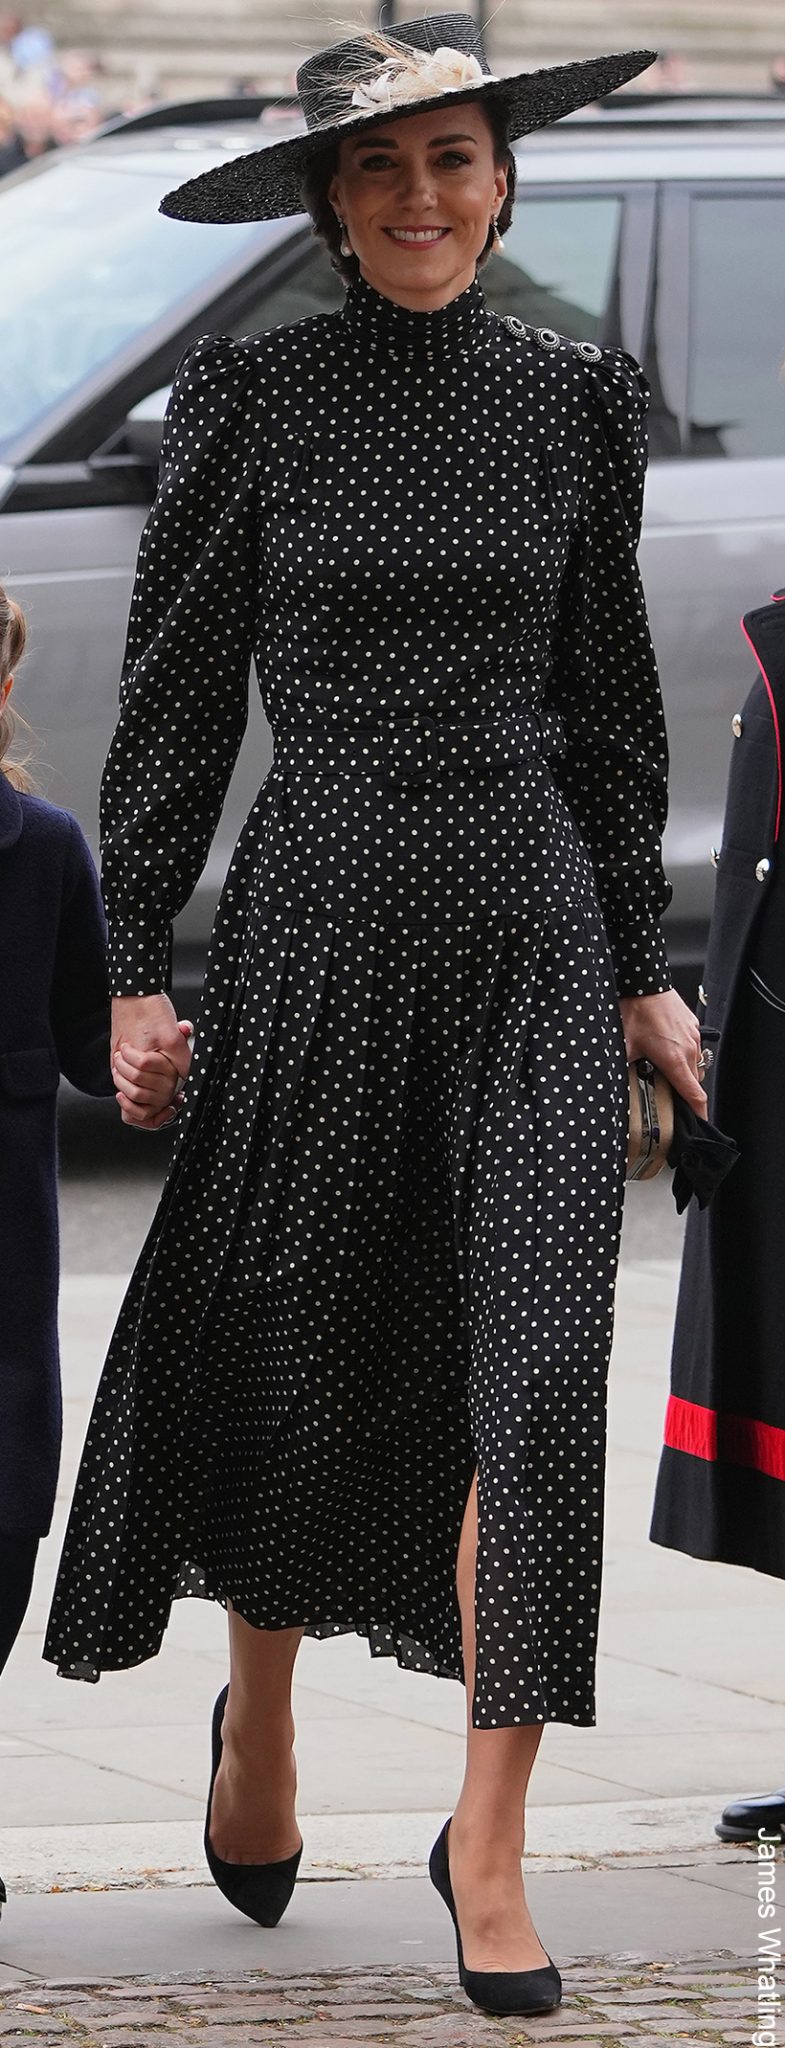 Kate Middleton March 2022 Outfits, Photos & Style Insights